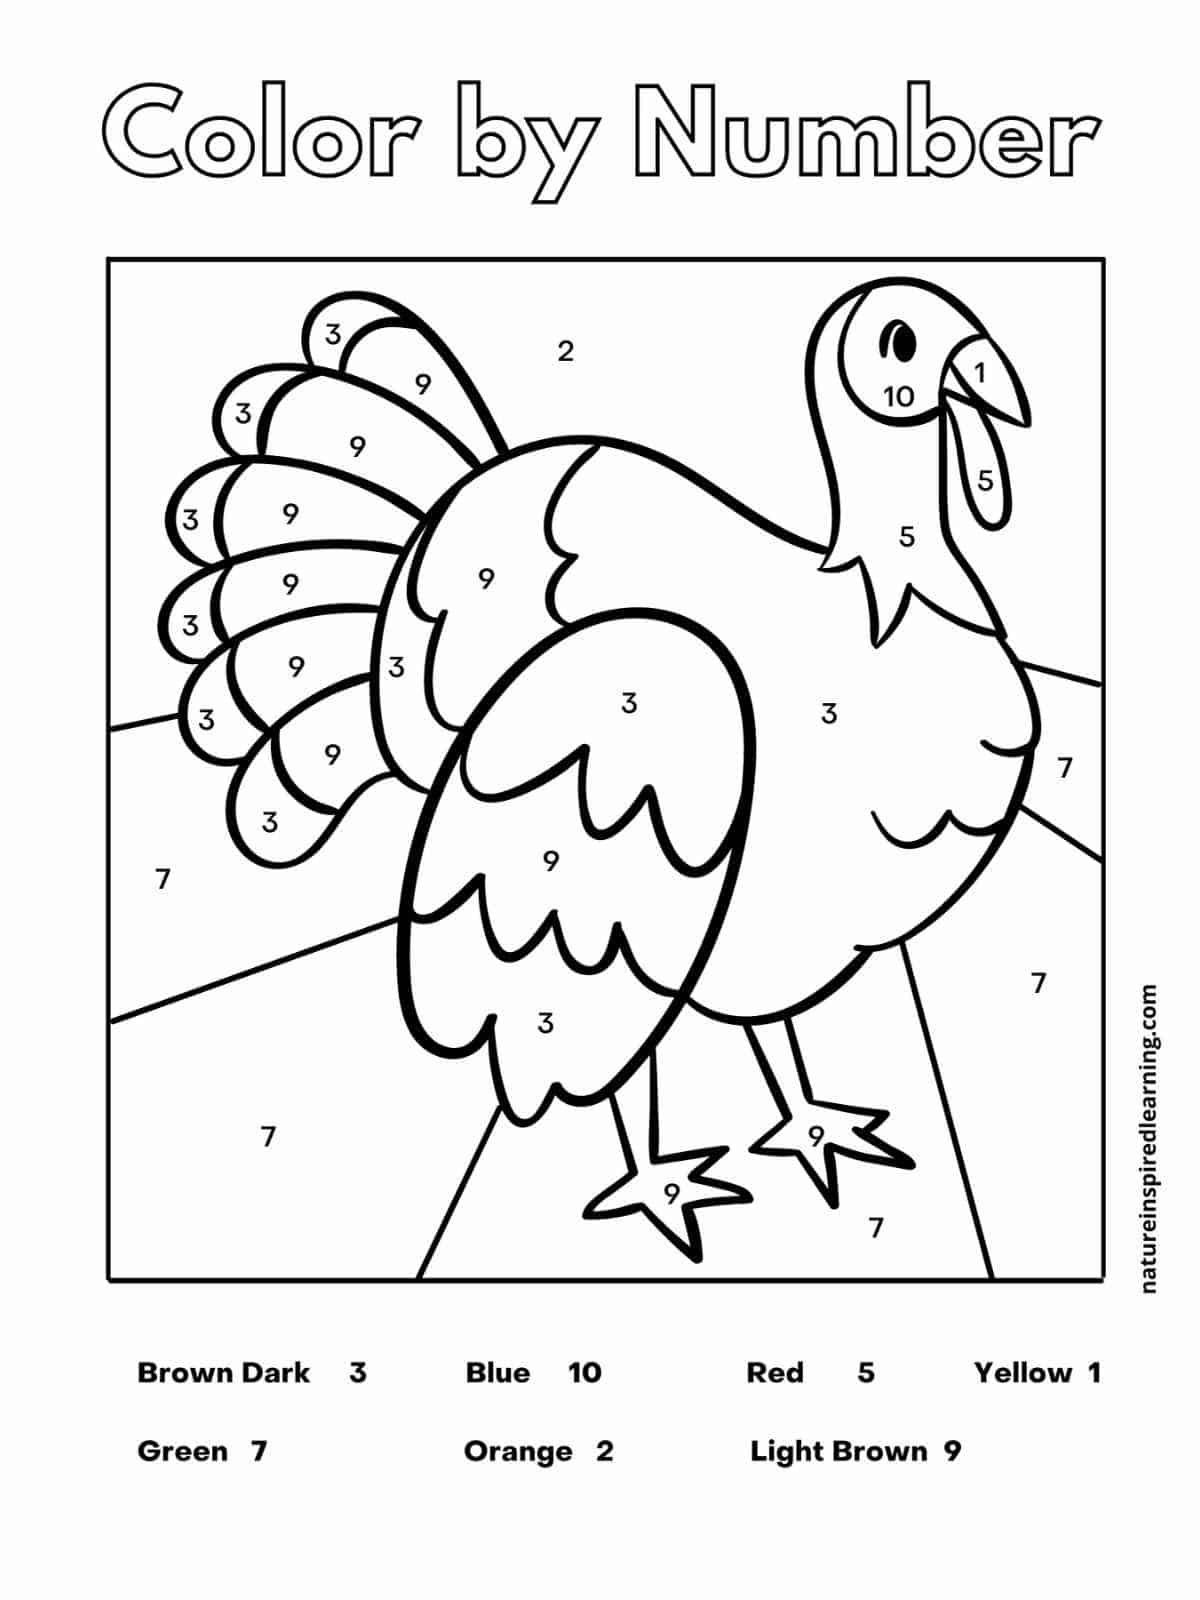 Black and white worksheet with Color by Number across the top in outline form with a large turkey within a square with numbers in different sections of the bird with a color key at the bottom.